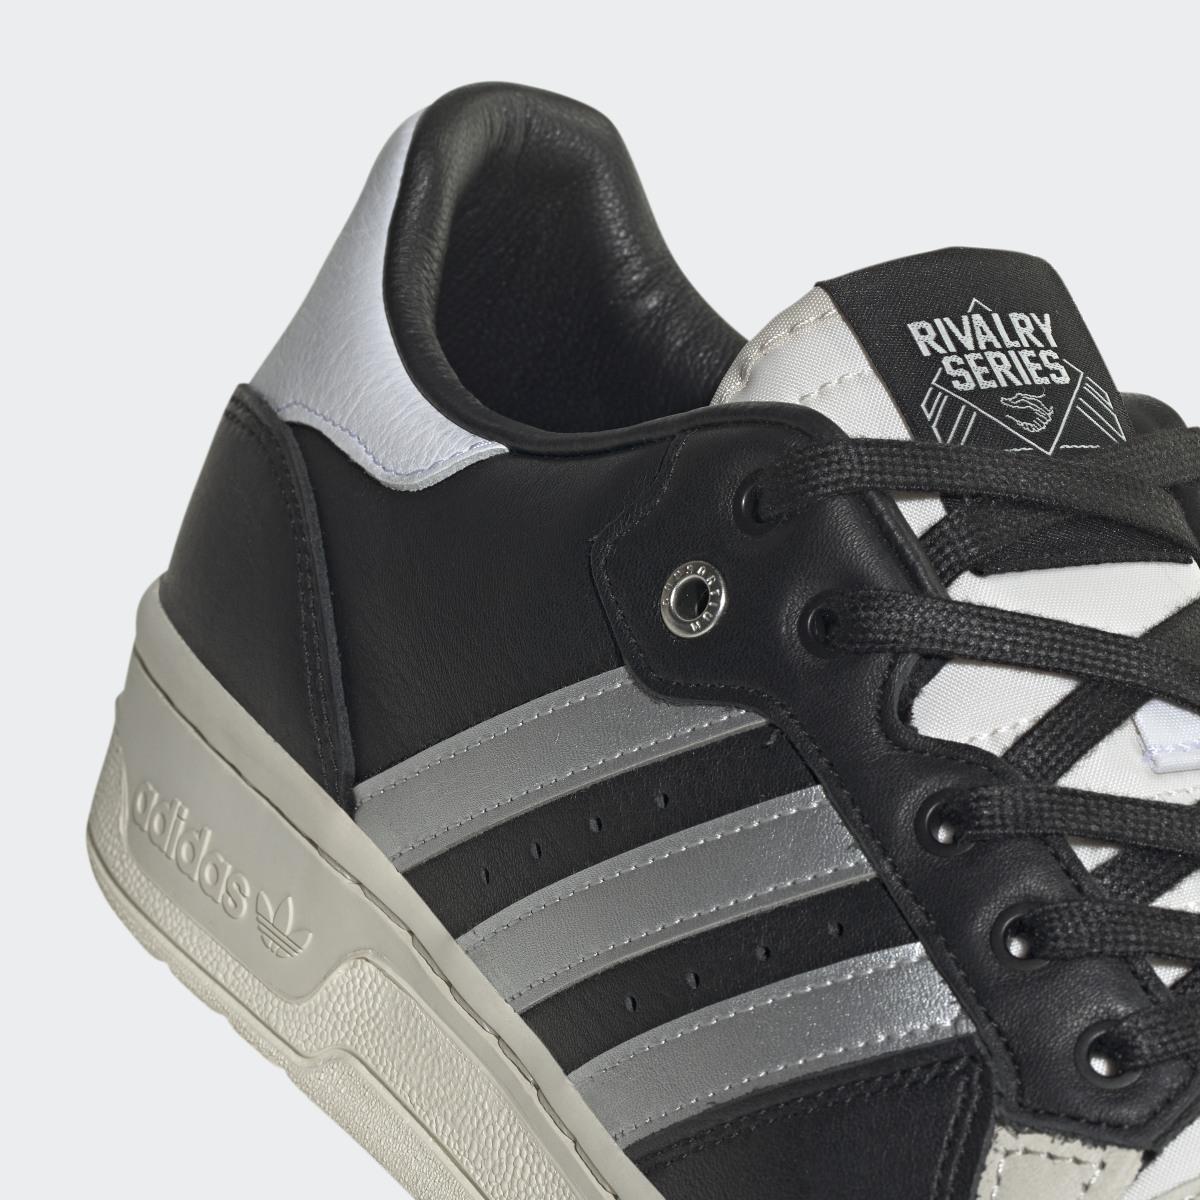 Adidas Chaussure Rivalry Low Consortium. 9